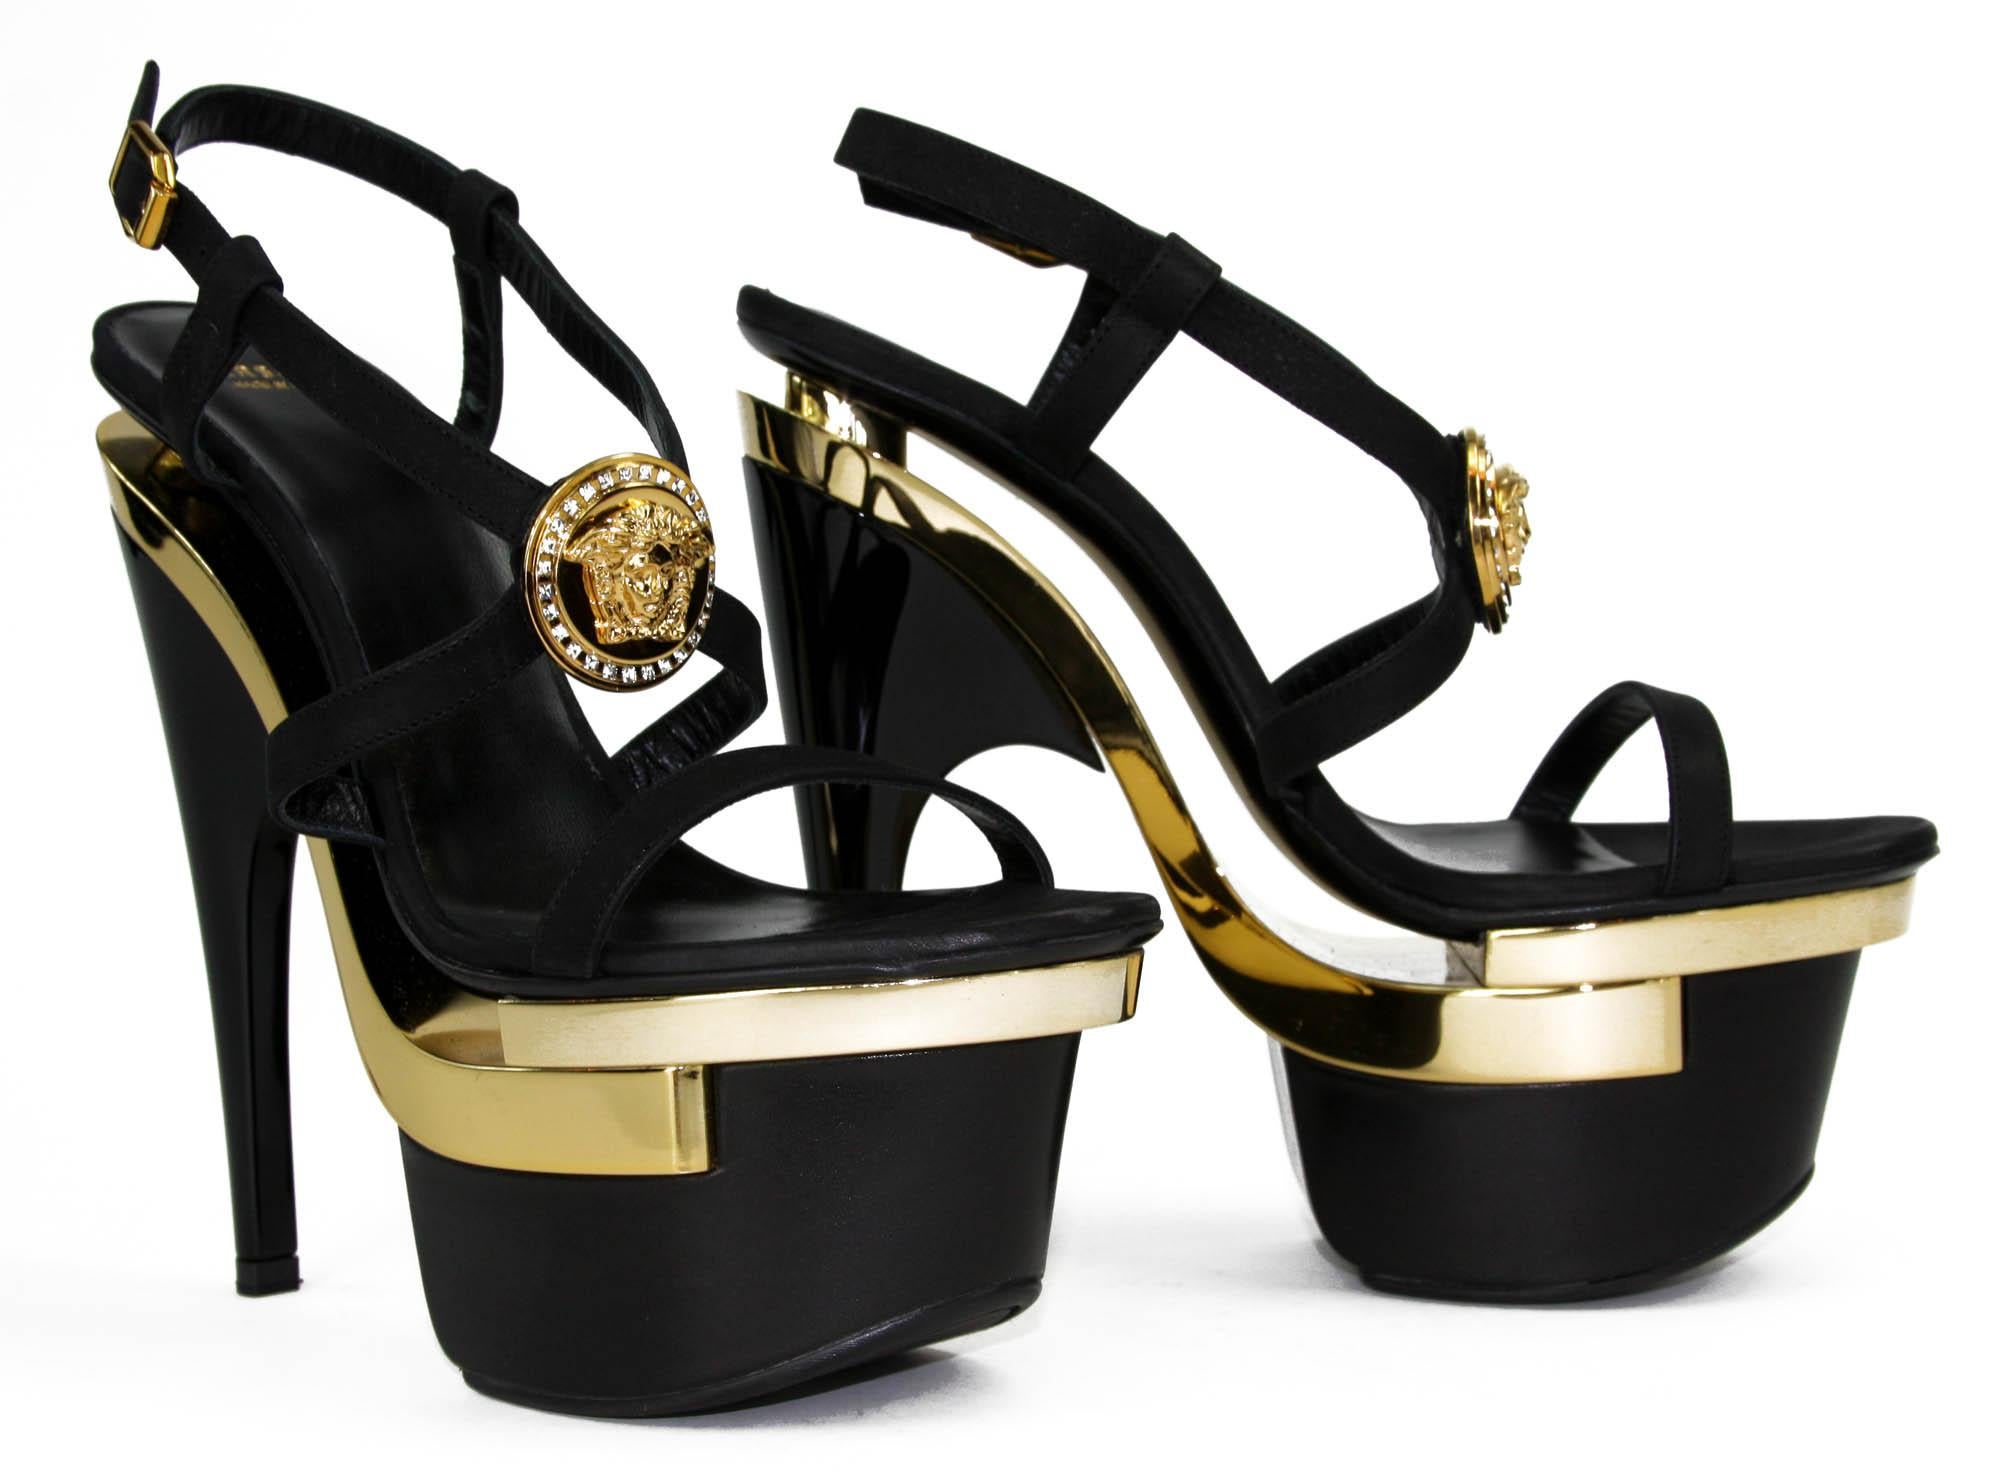 New Versace Triple Platform Strap Sandals
Sizes Available - 35.5, 38, 38.5, 39, 39.5, 40, 41.
Colors - Gold and Black
100% Leather
Swarovski Crystals Gold Medusa
Leather Lining, Leather Sole
Heel Height - 6.5 inches, Platform - 3 inches.
Made in